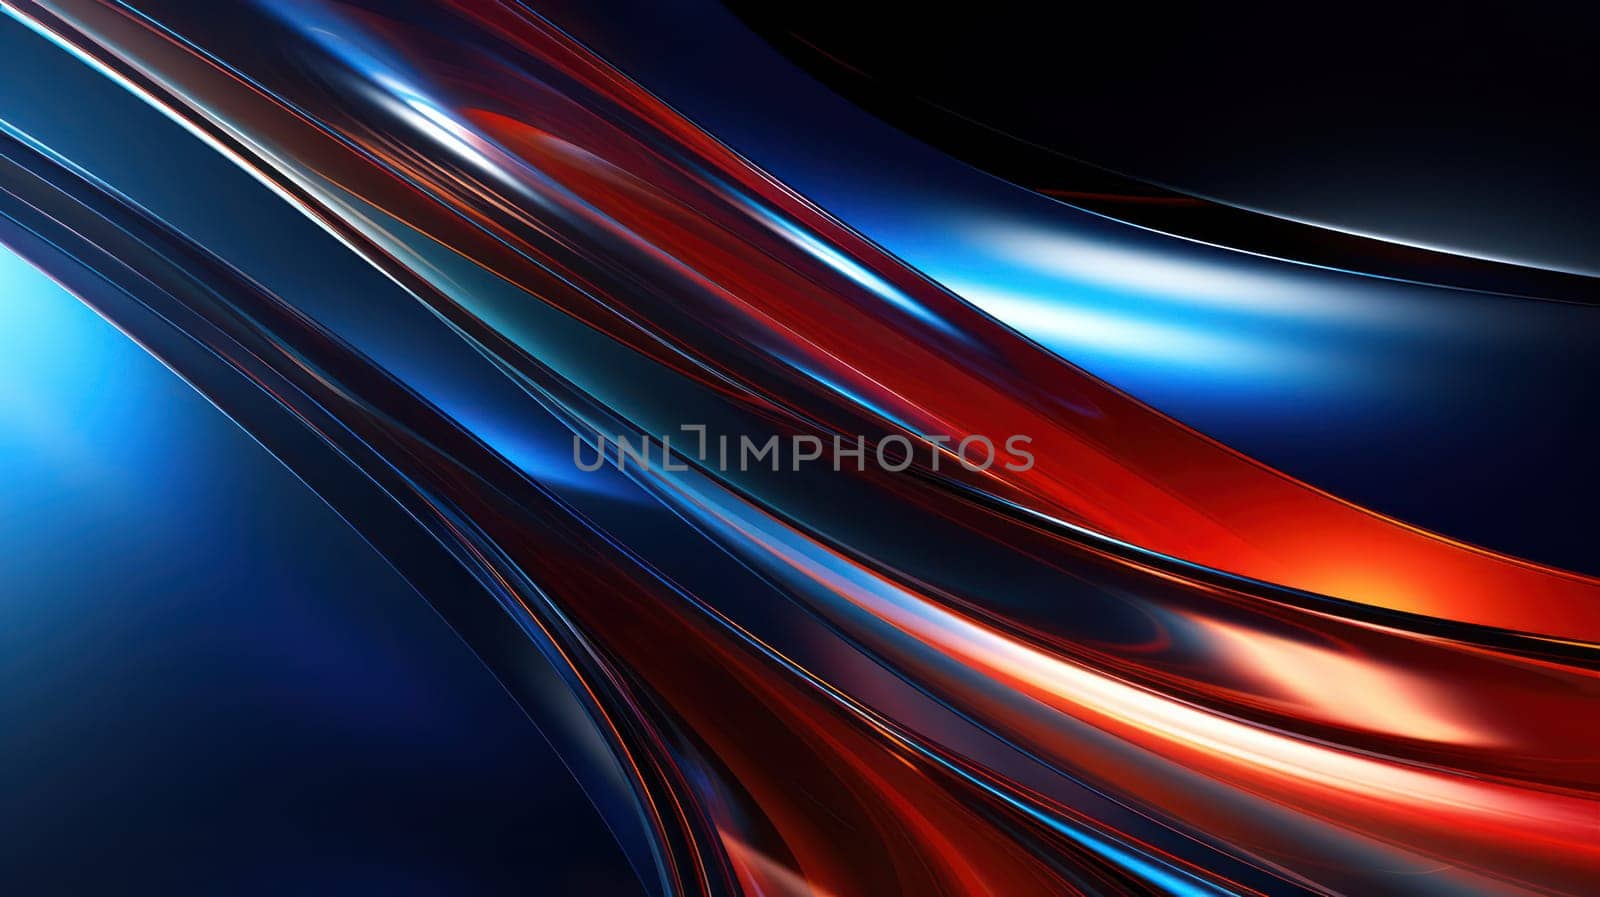 Abstract Wave of Bright Light: A Futuristic Digital Illustration by Vichizh